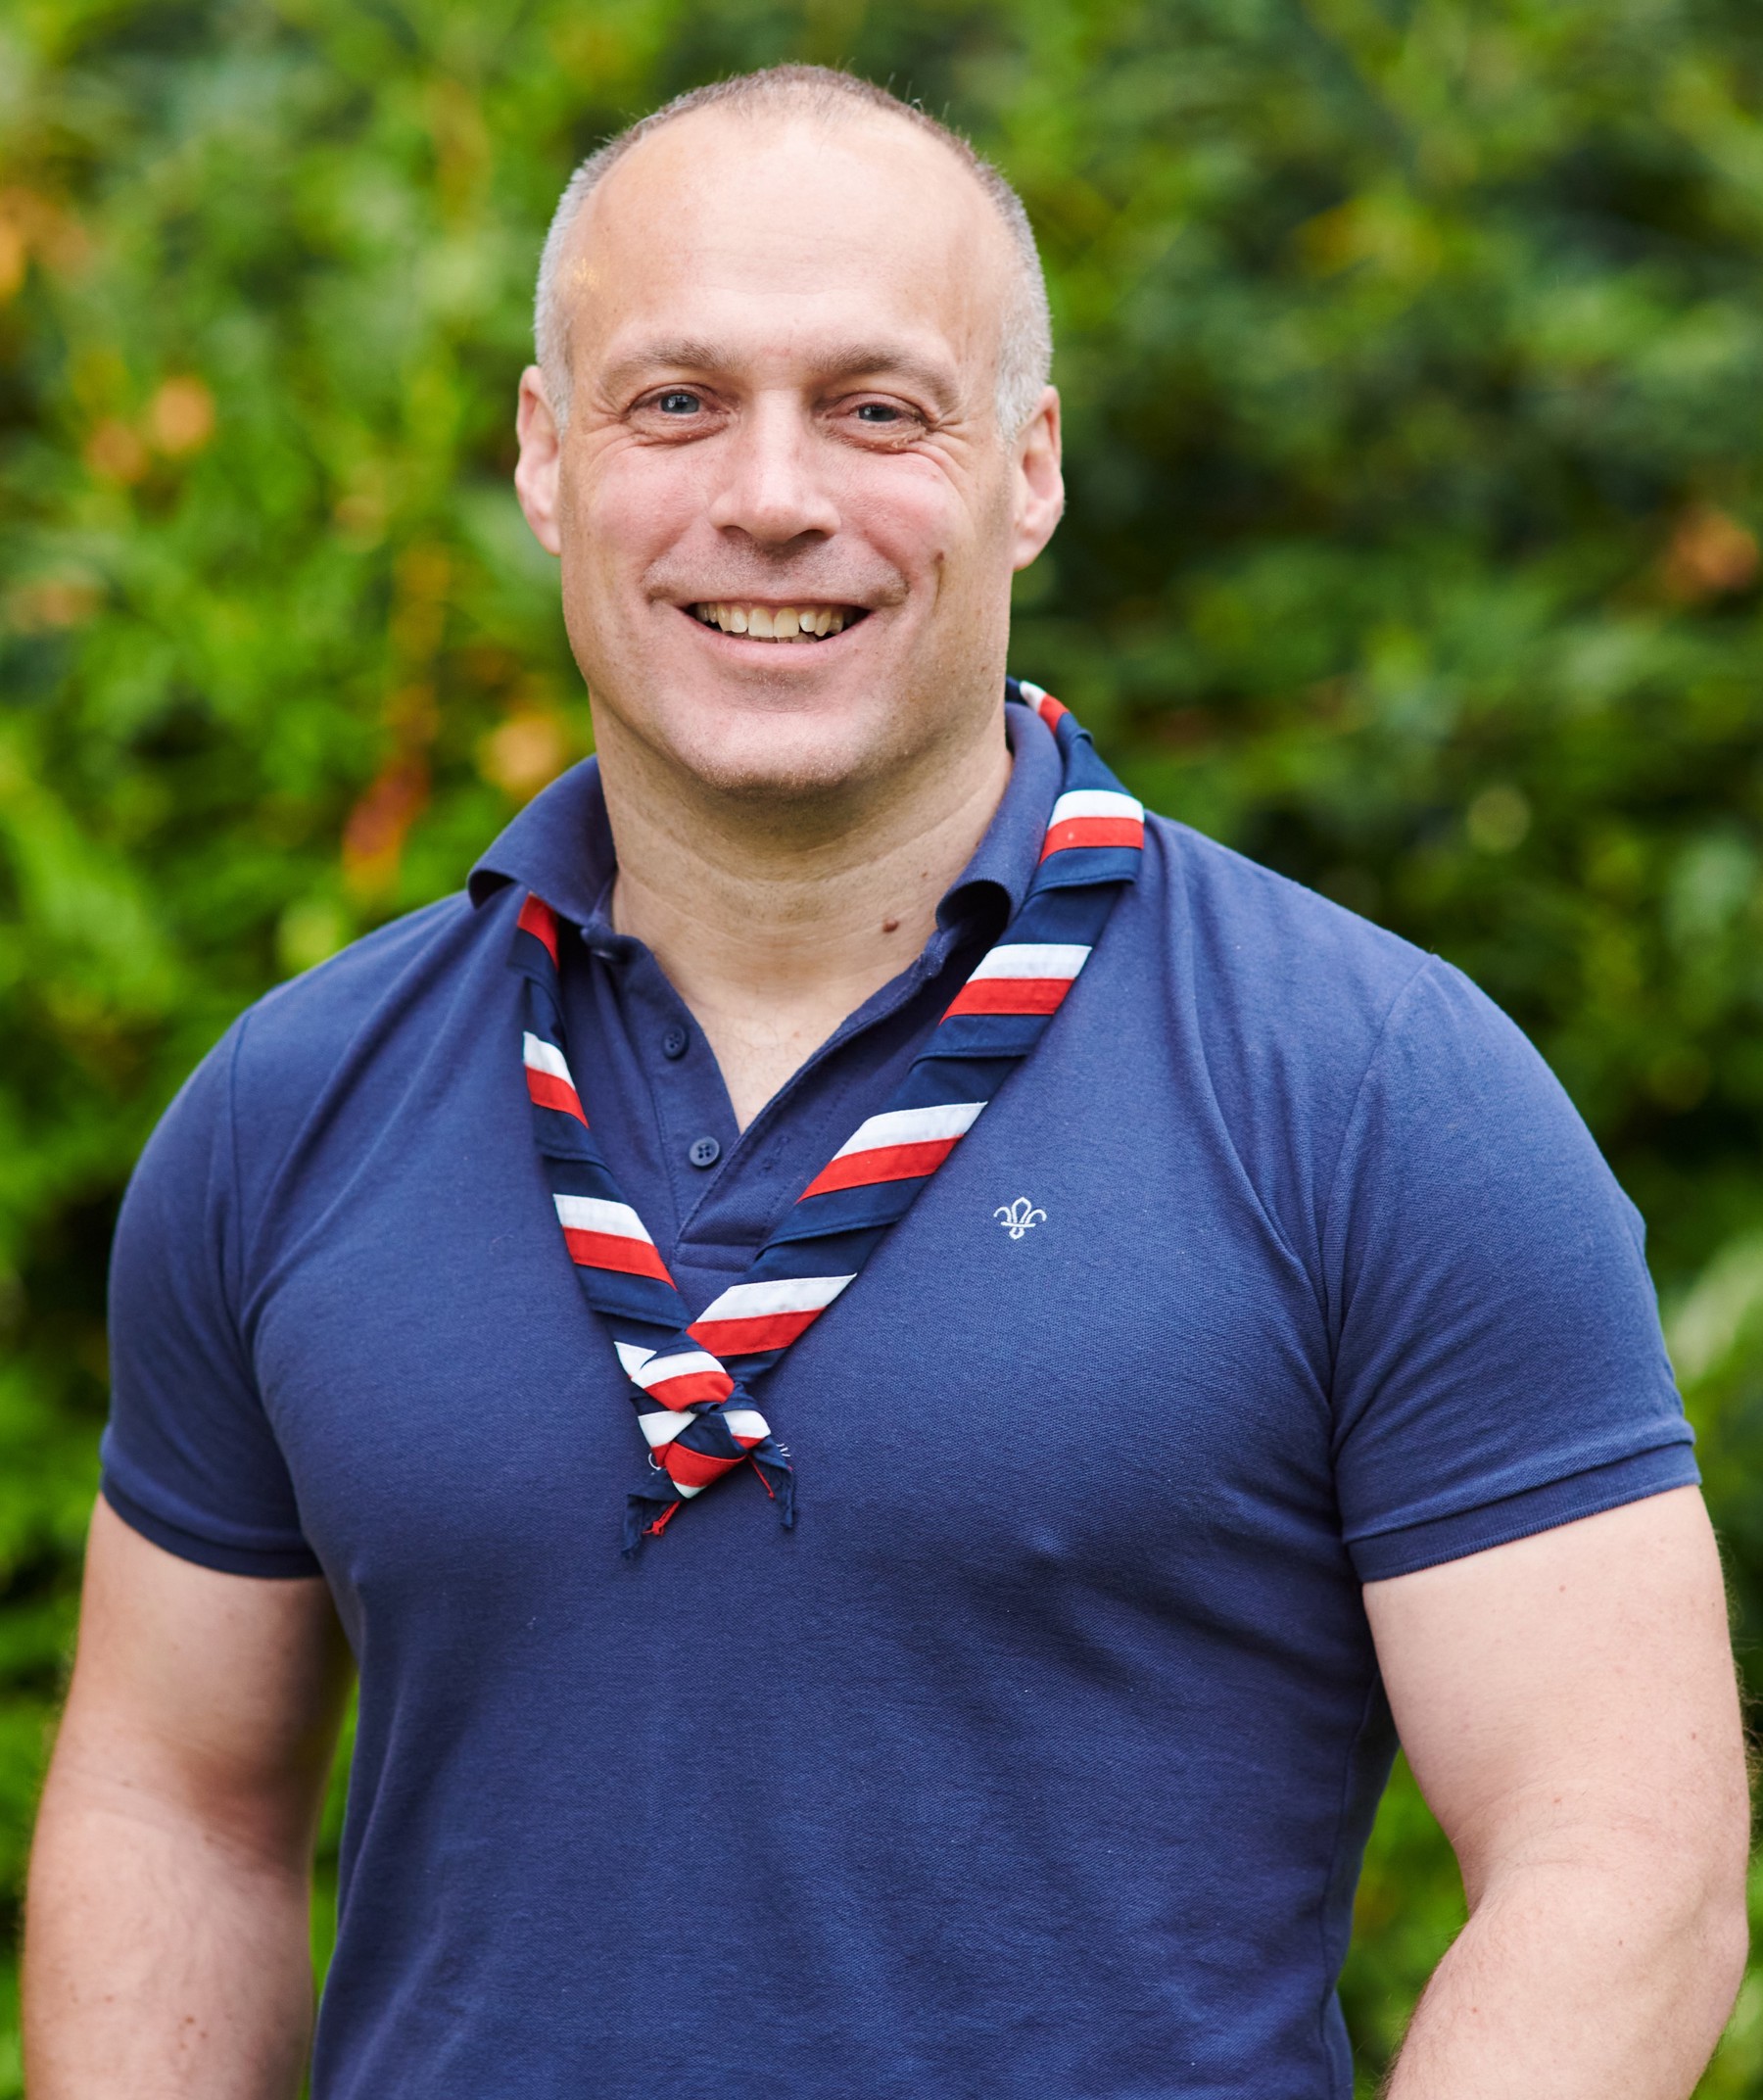 Michael Wood-Williams smiling at the camera while wearing a navy Scouts polo shirt and stripy scarf